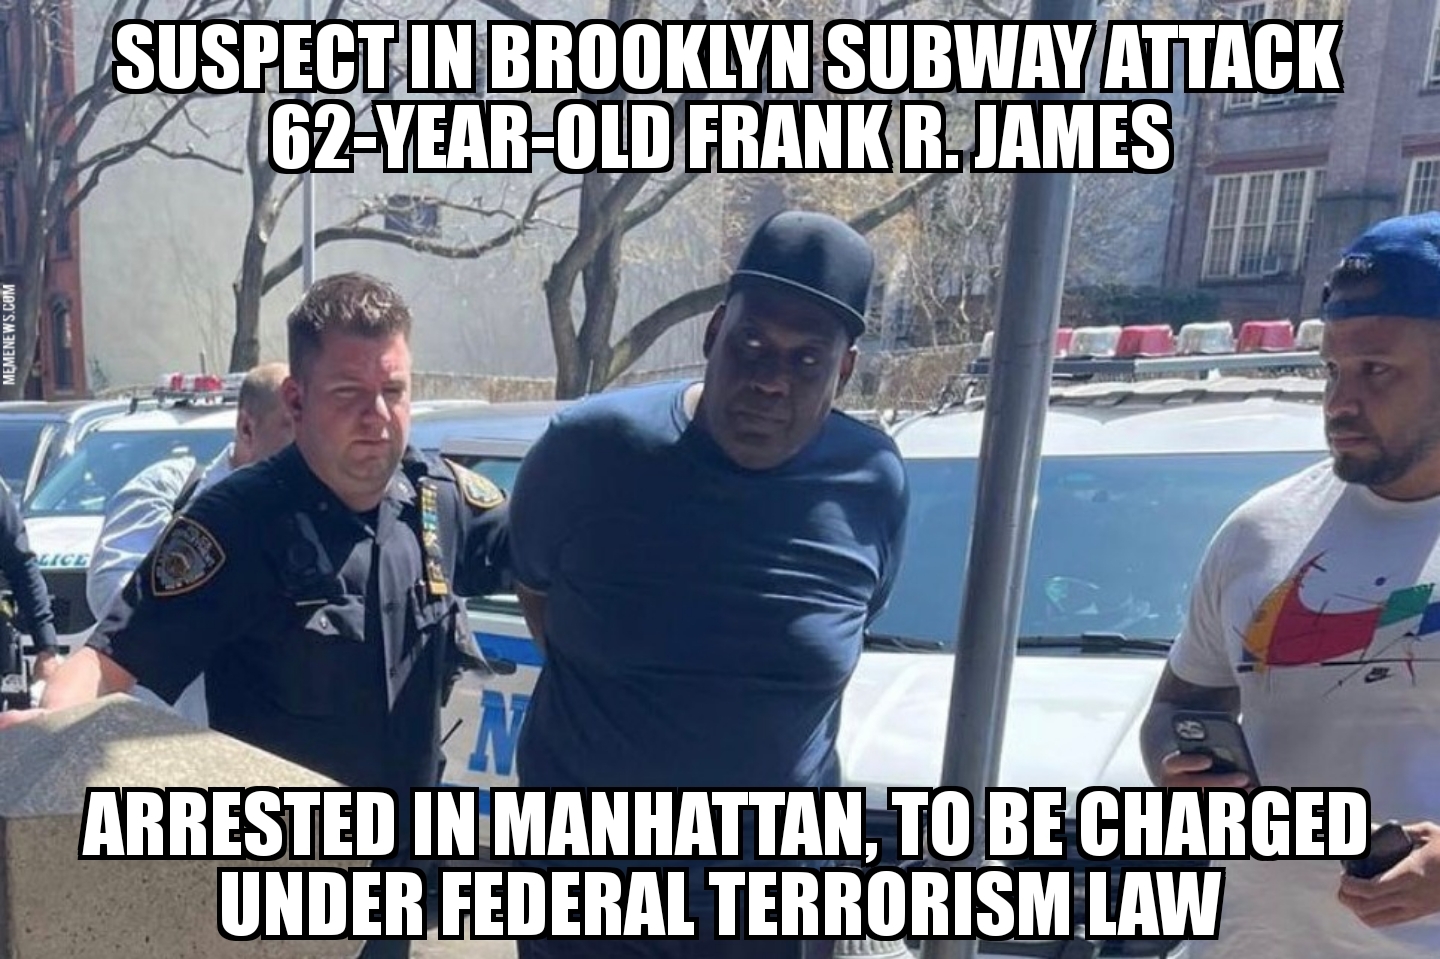 Brooklyn subway attack suspect arrested